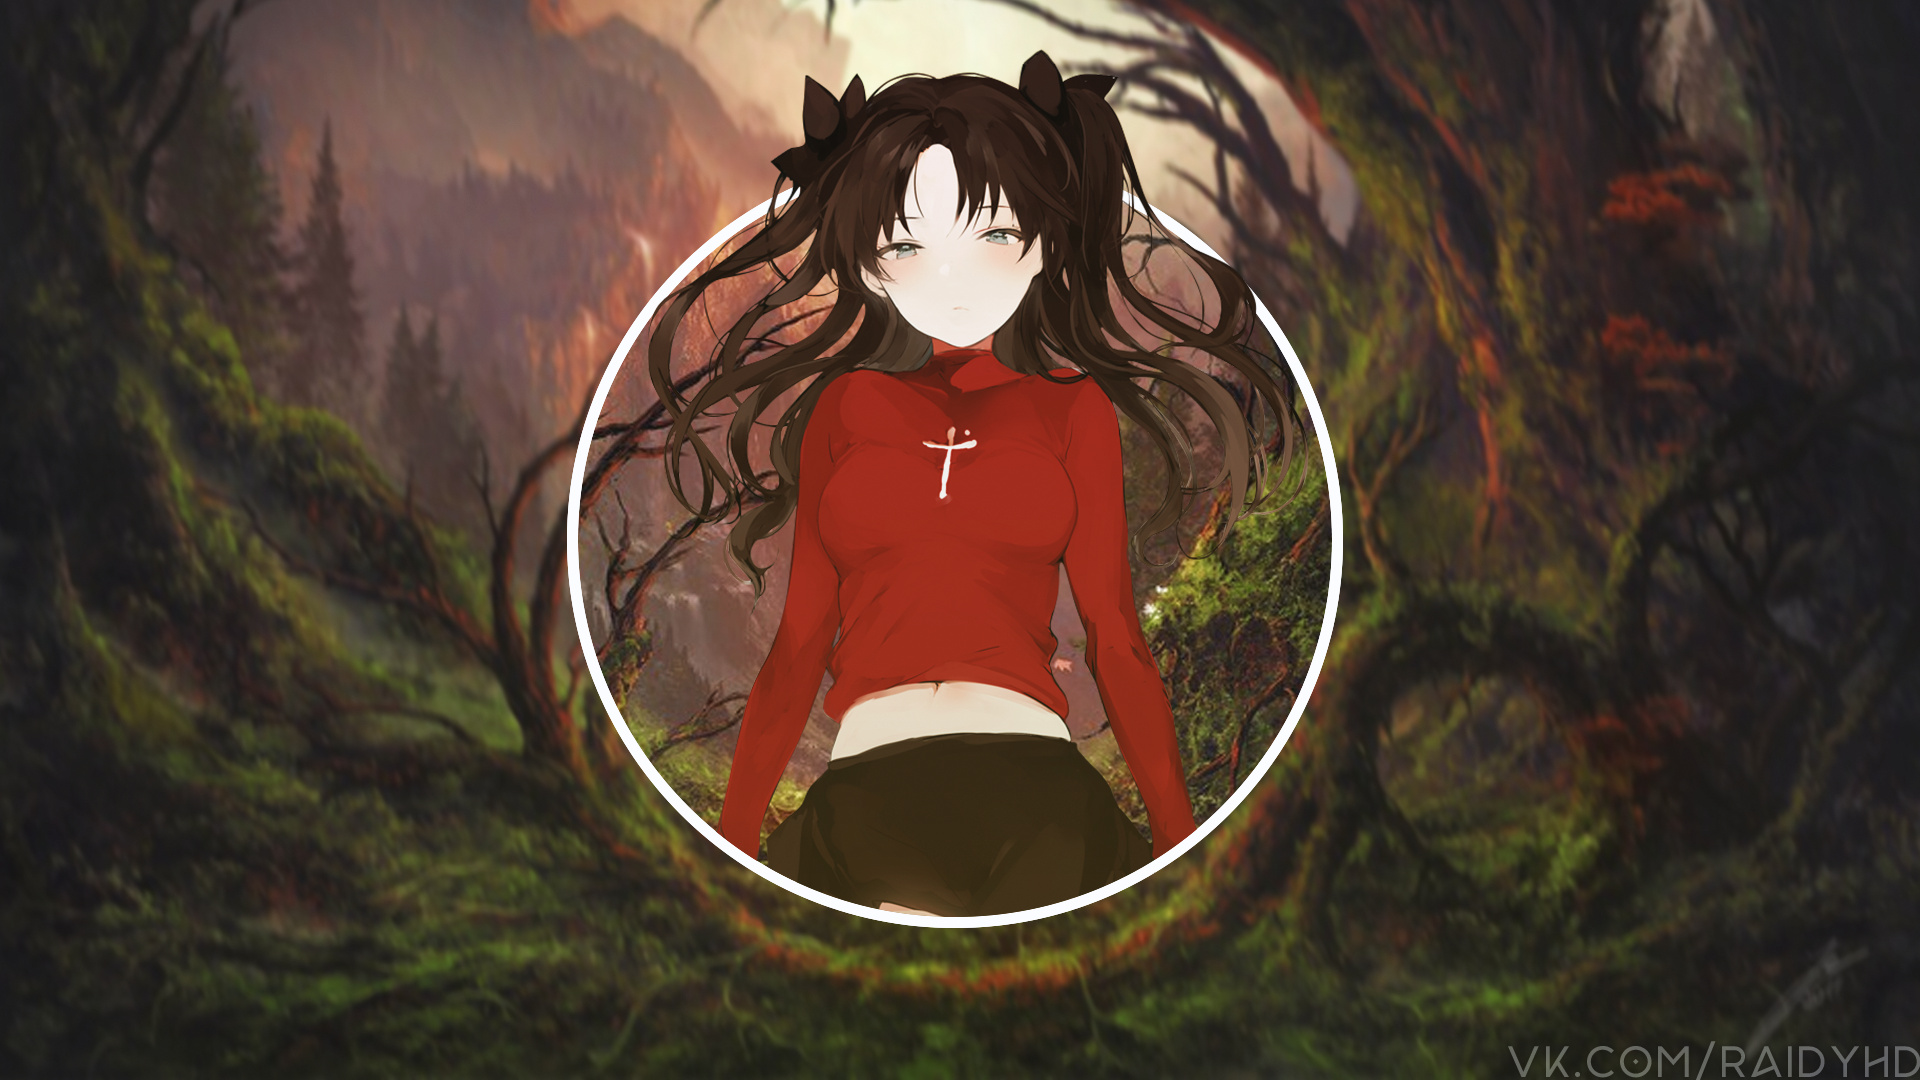 Anime 1920x1080 anime girls anime picture-in-picture Fate series Fate/Stay Night Tohsaka Rin